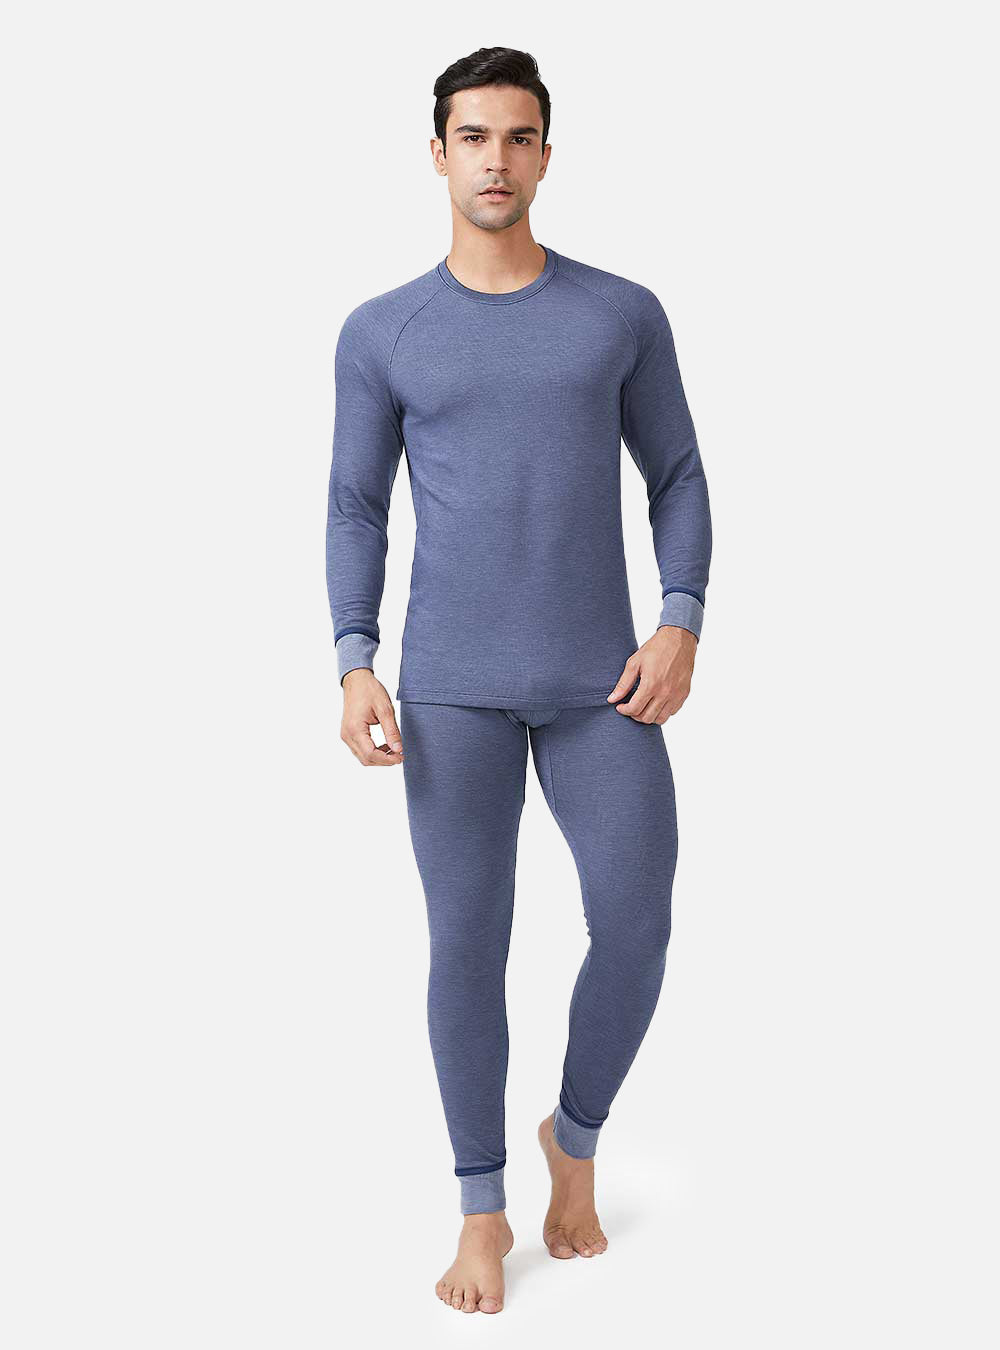 Chiccall Men's Thermal Underwear Pants, Warm Long Johns Leggings Base Layer  Bottoms Elephant Trunk Separation Leggings,,on Clearance